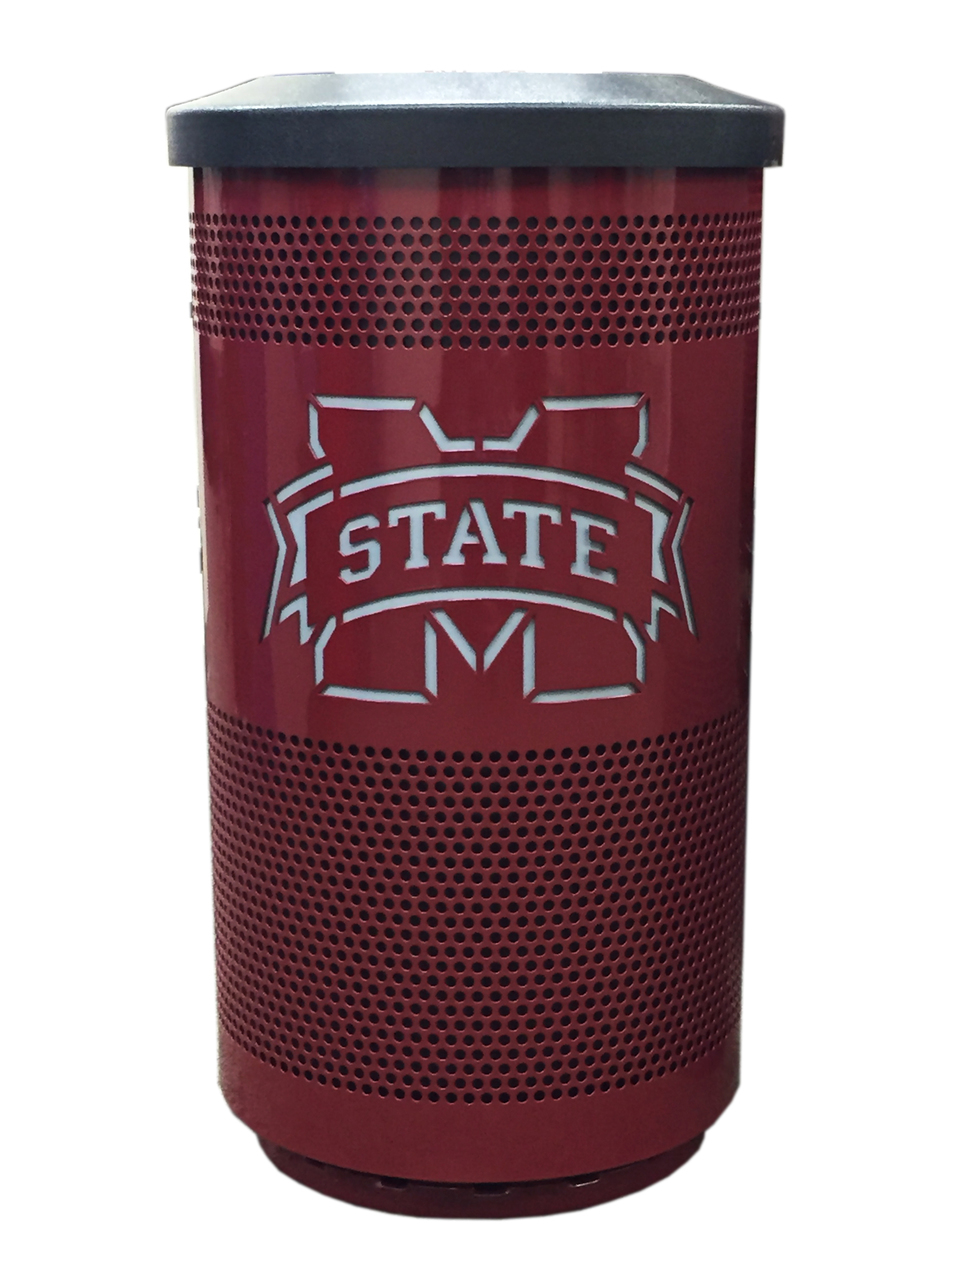 35 Gallon Stadium Series Painted Trash Container with Logo